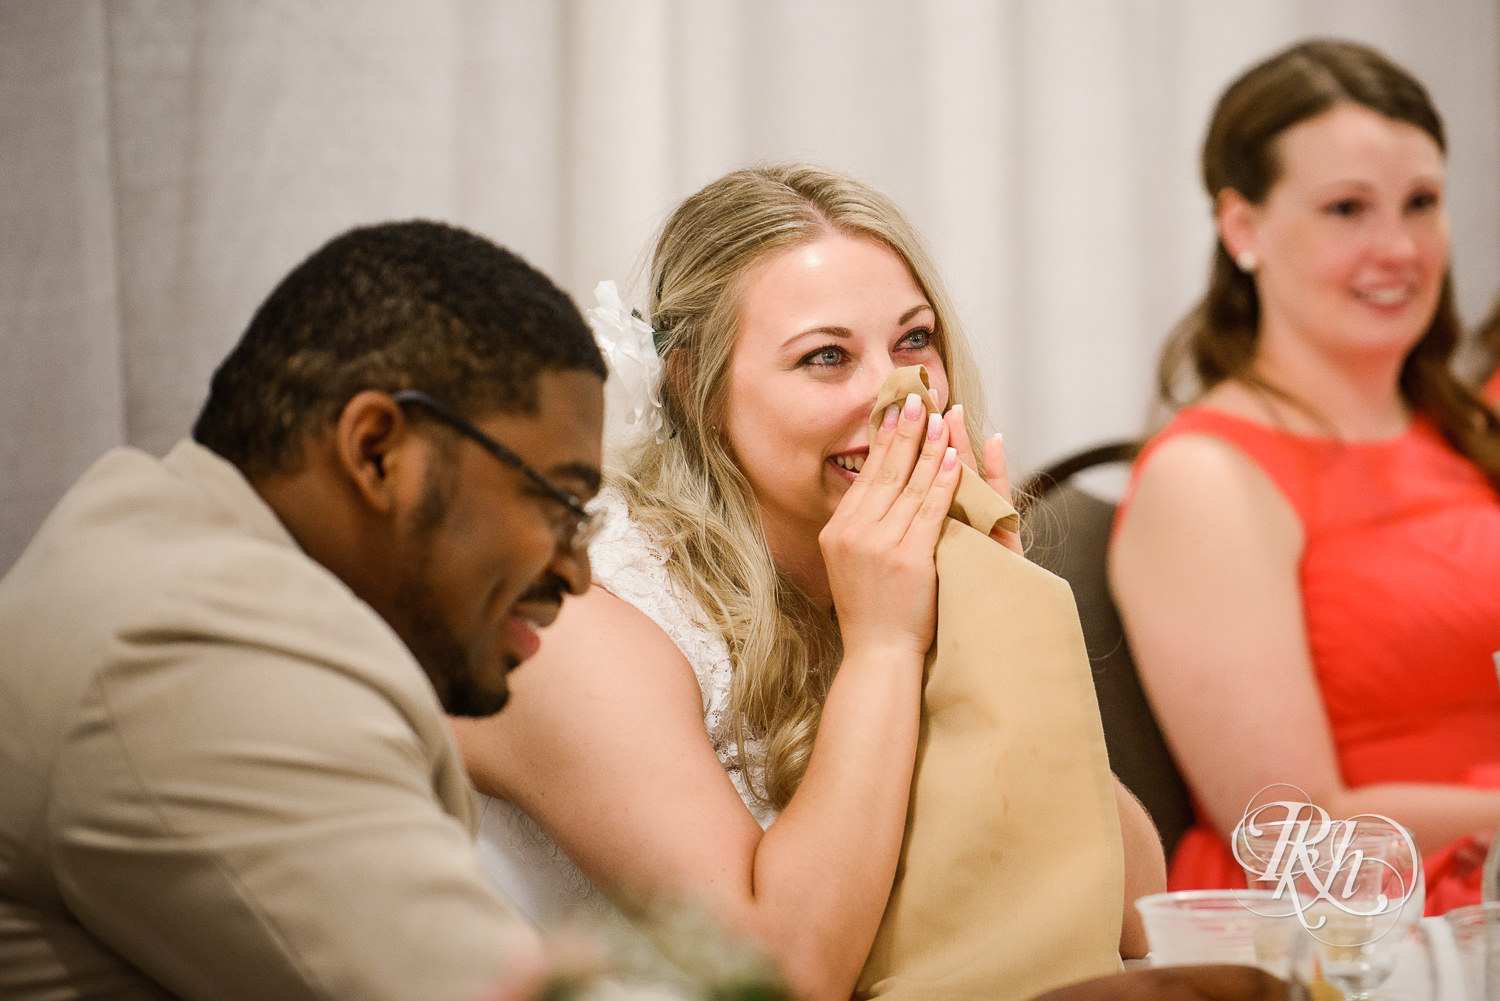 White bride and black groom smile during wedding reception at North Metro Event Center in Shoreview, Minnesota.